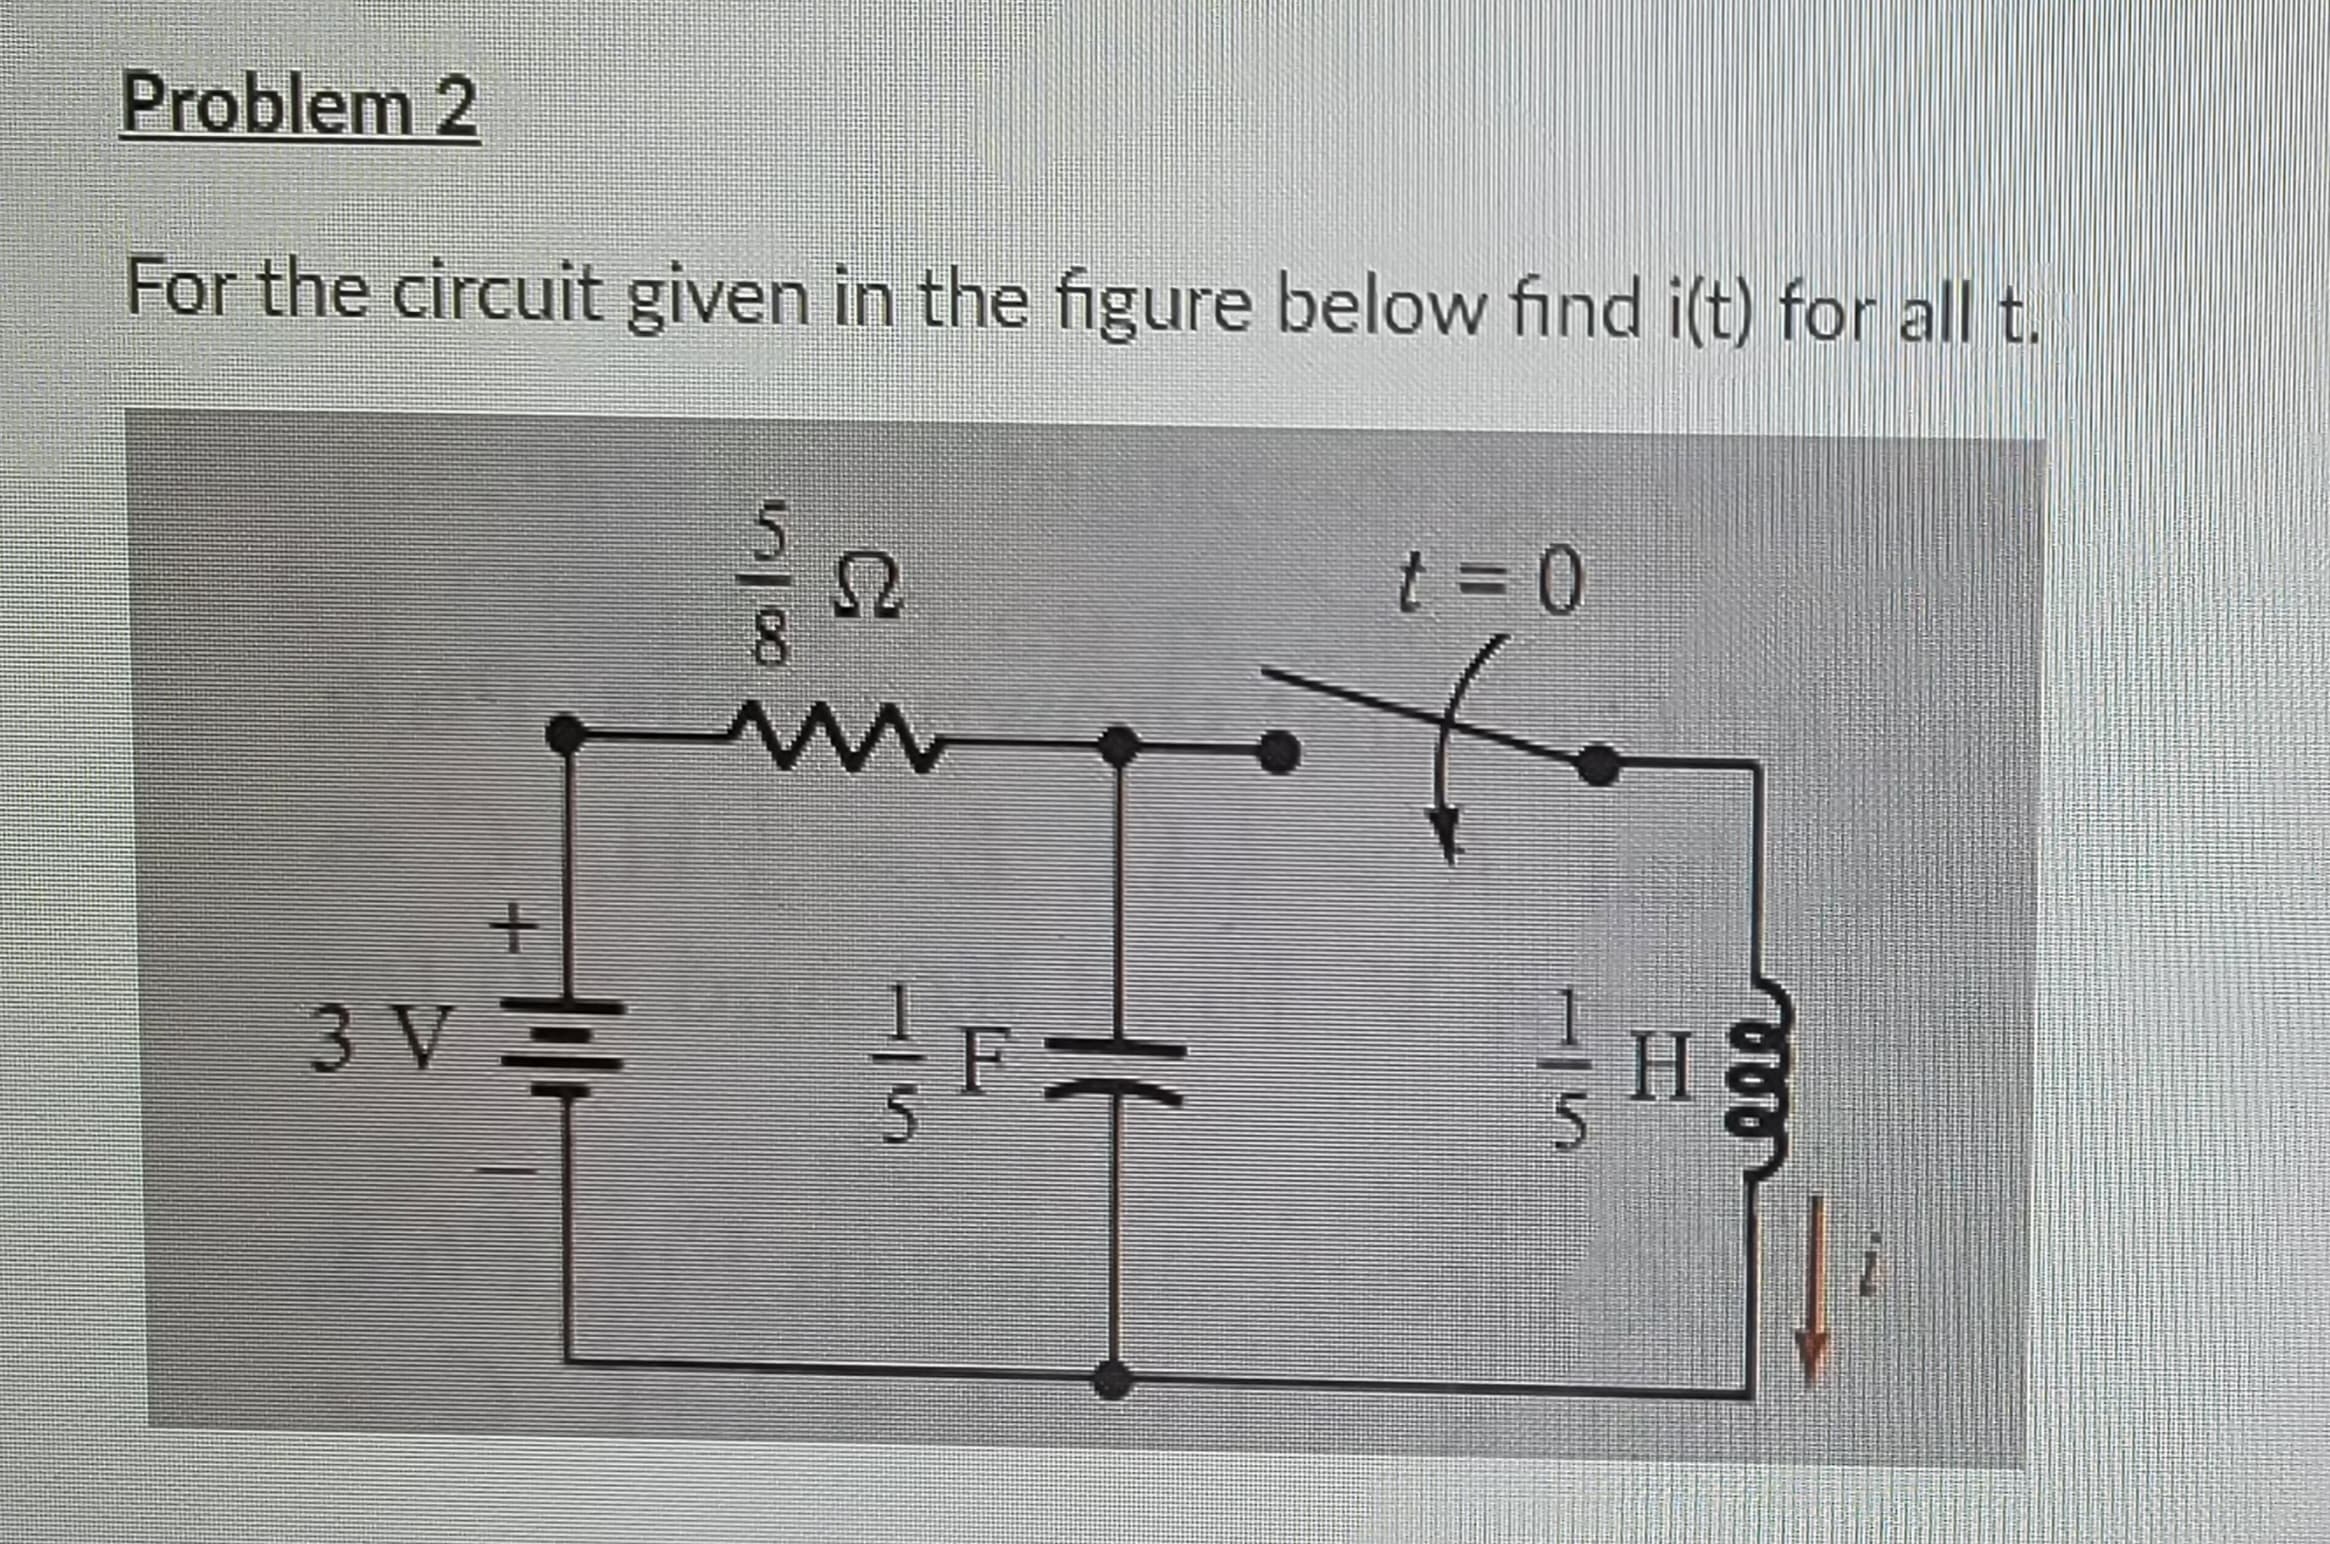 Problem 2
For the circuit given in the figure below find i(t) for all t.
+
3V=
5
8
m
C
1⁄²F =
t = 0
-IS
eee
HE
Η